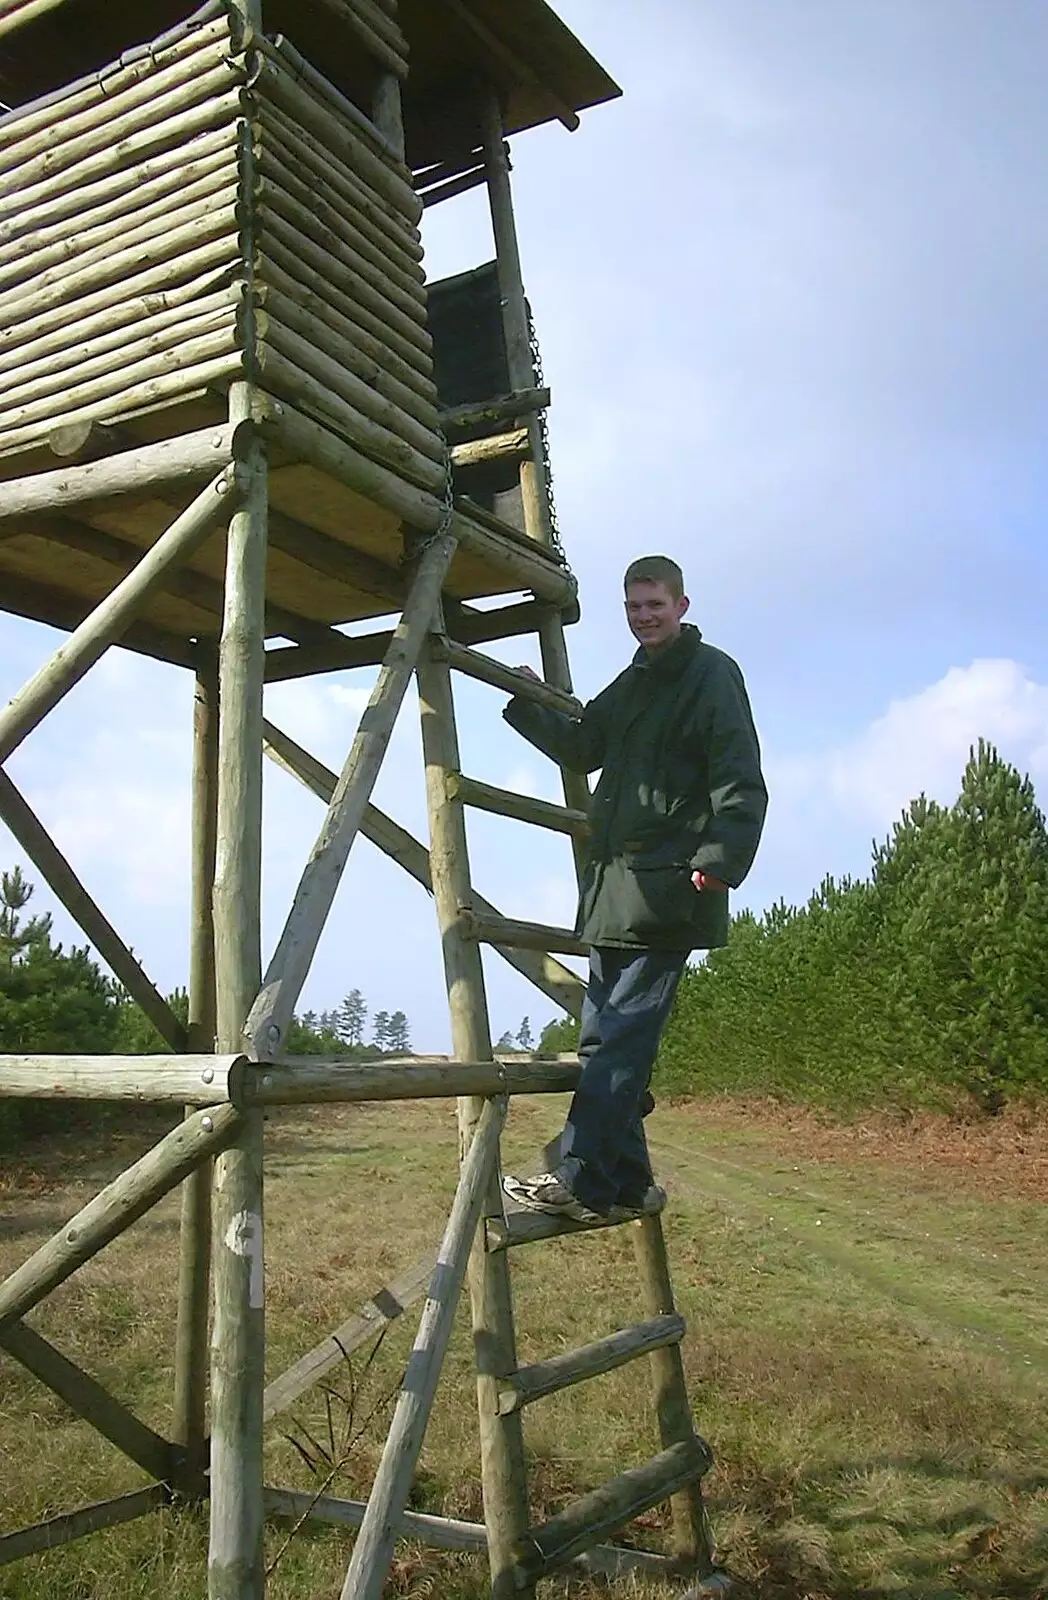 The Boy Phil climbs a tower, from A day at the Husky Races, Lakenheath, Suffolk - 29th February 2004